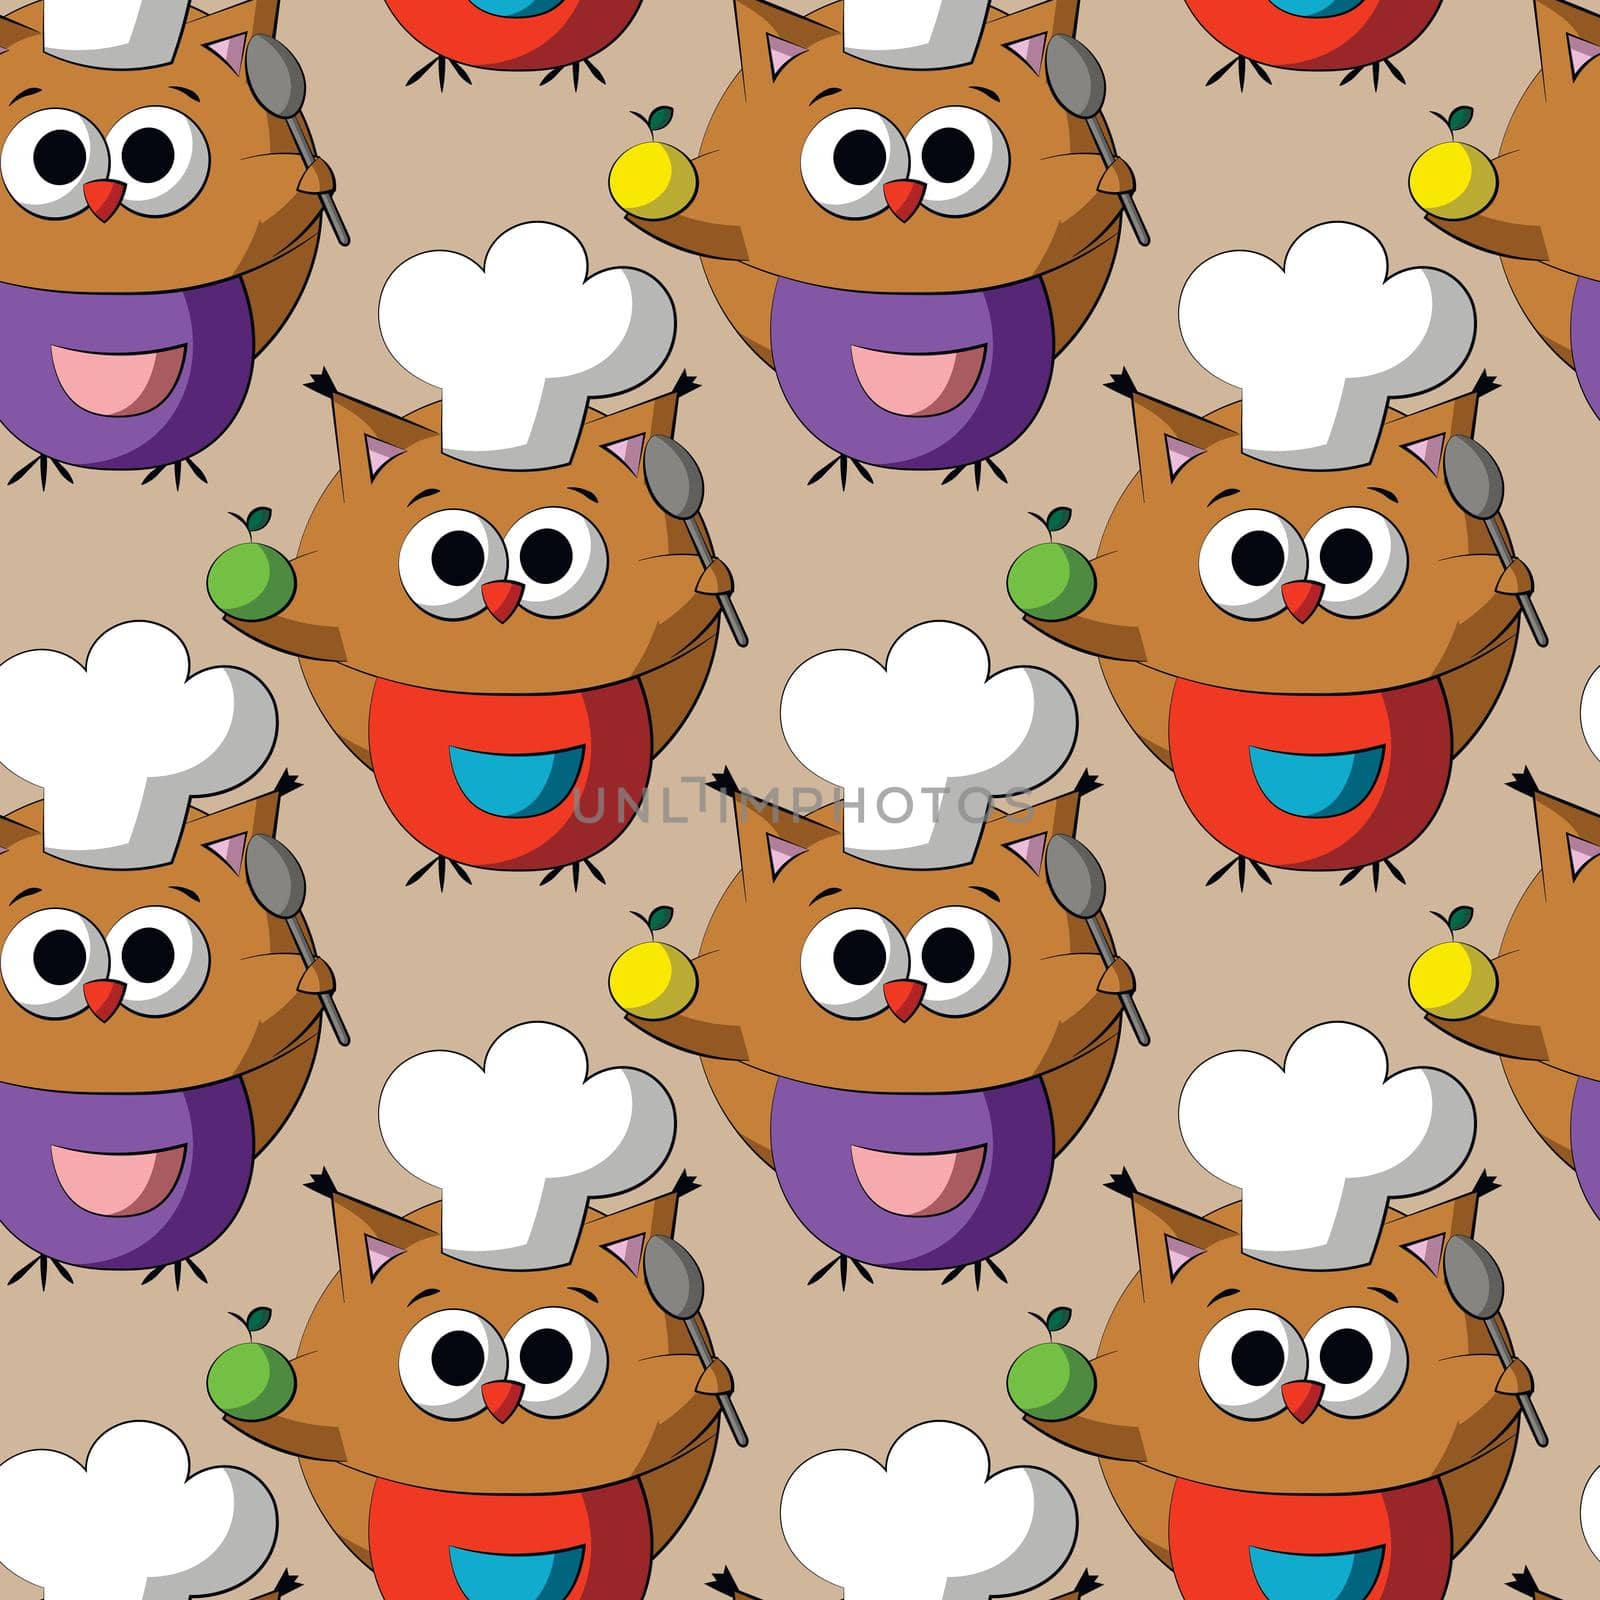 Seamless vector pattern with cute cartoon owl chef by AnastasiaPen